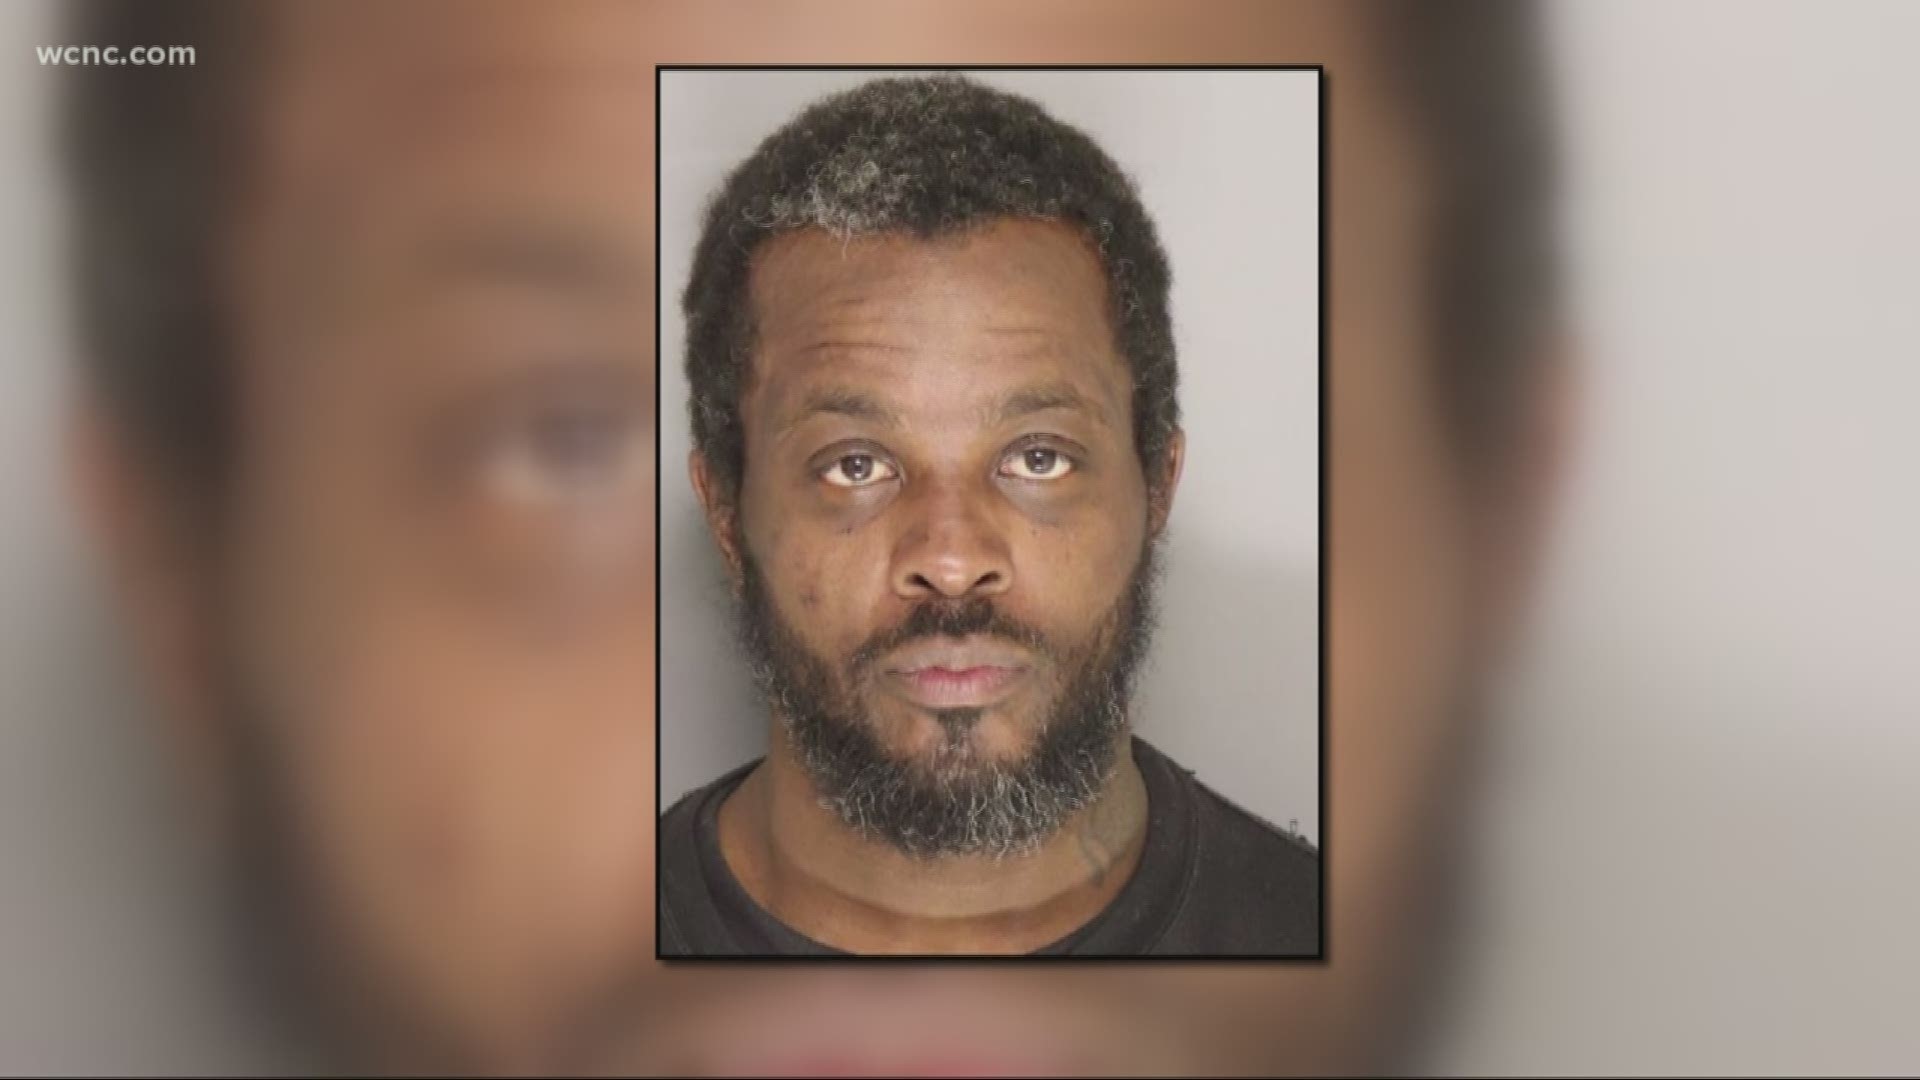 Police are actively searching for 41-year old Derrick McIlwain. He is wanted for a November murder in Ballantyne and a May murder in Lancaster County.